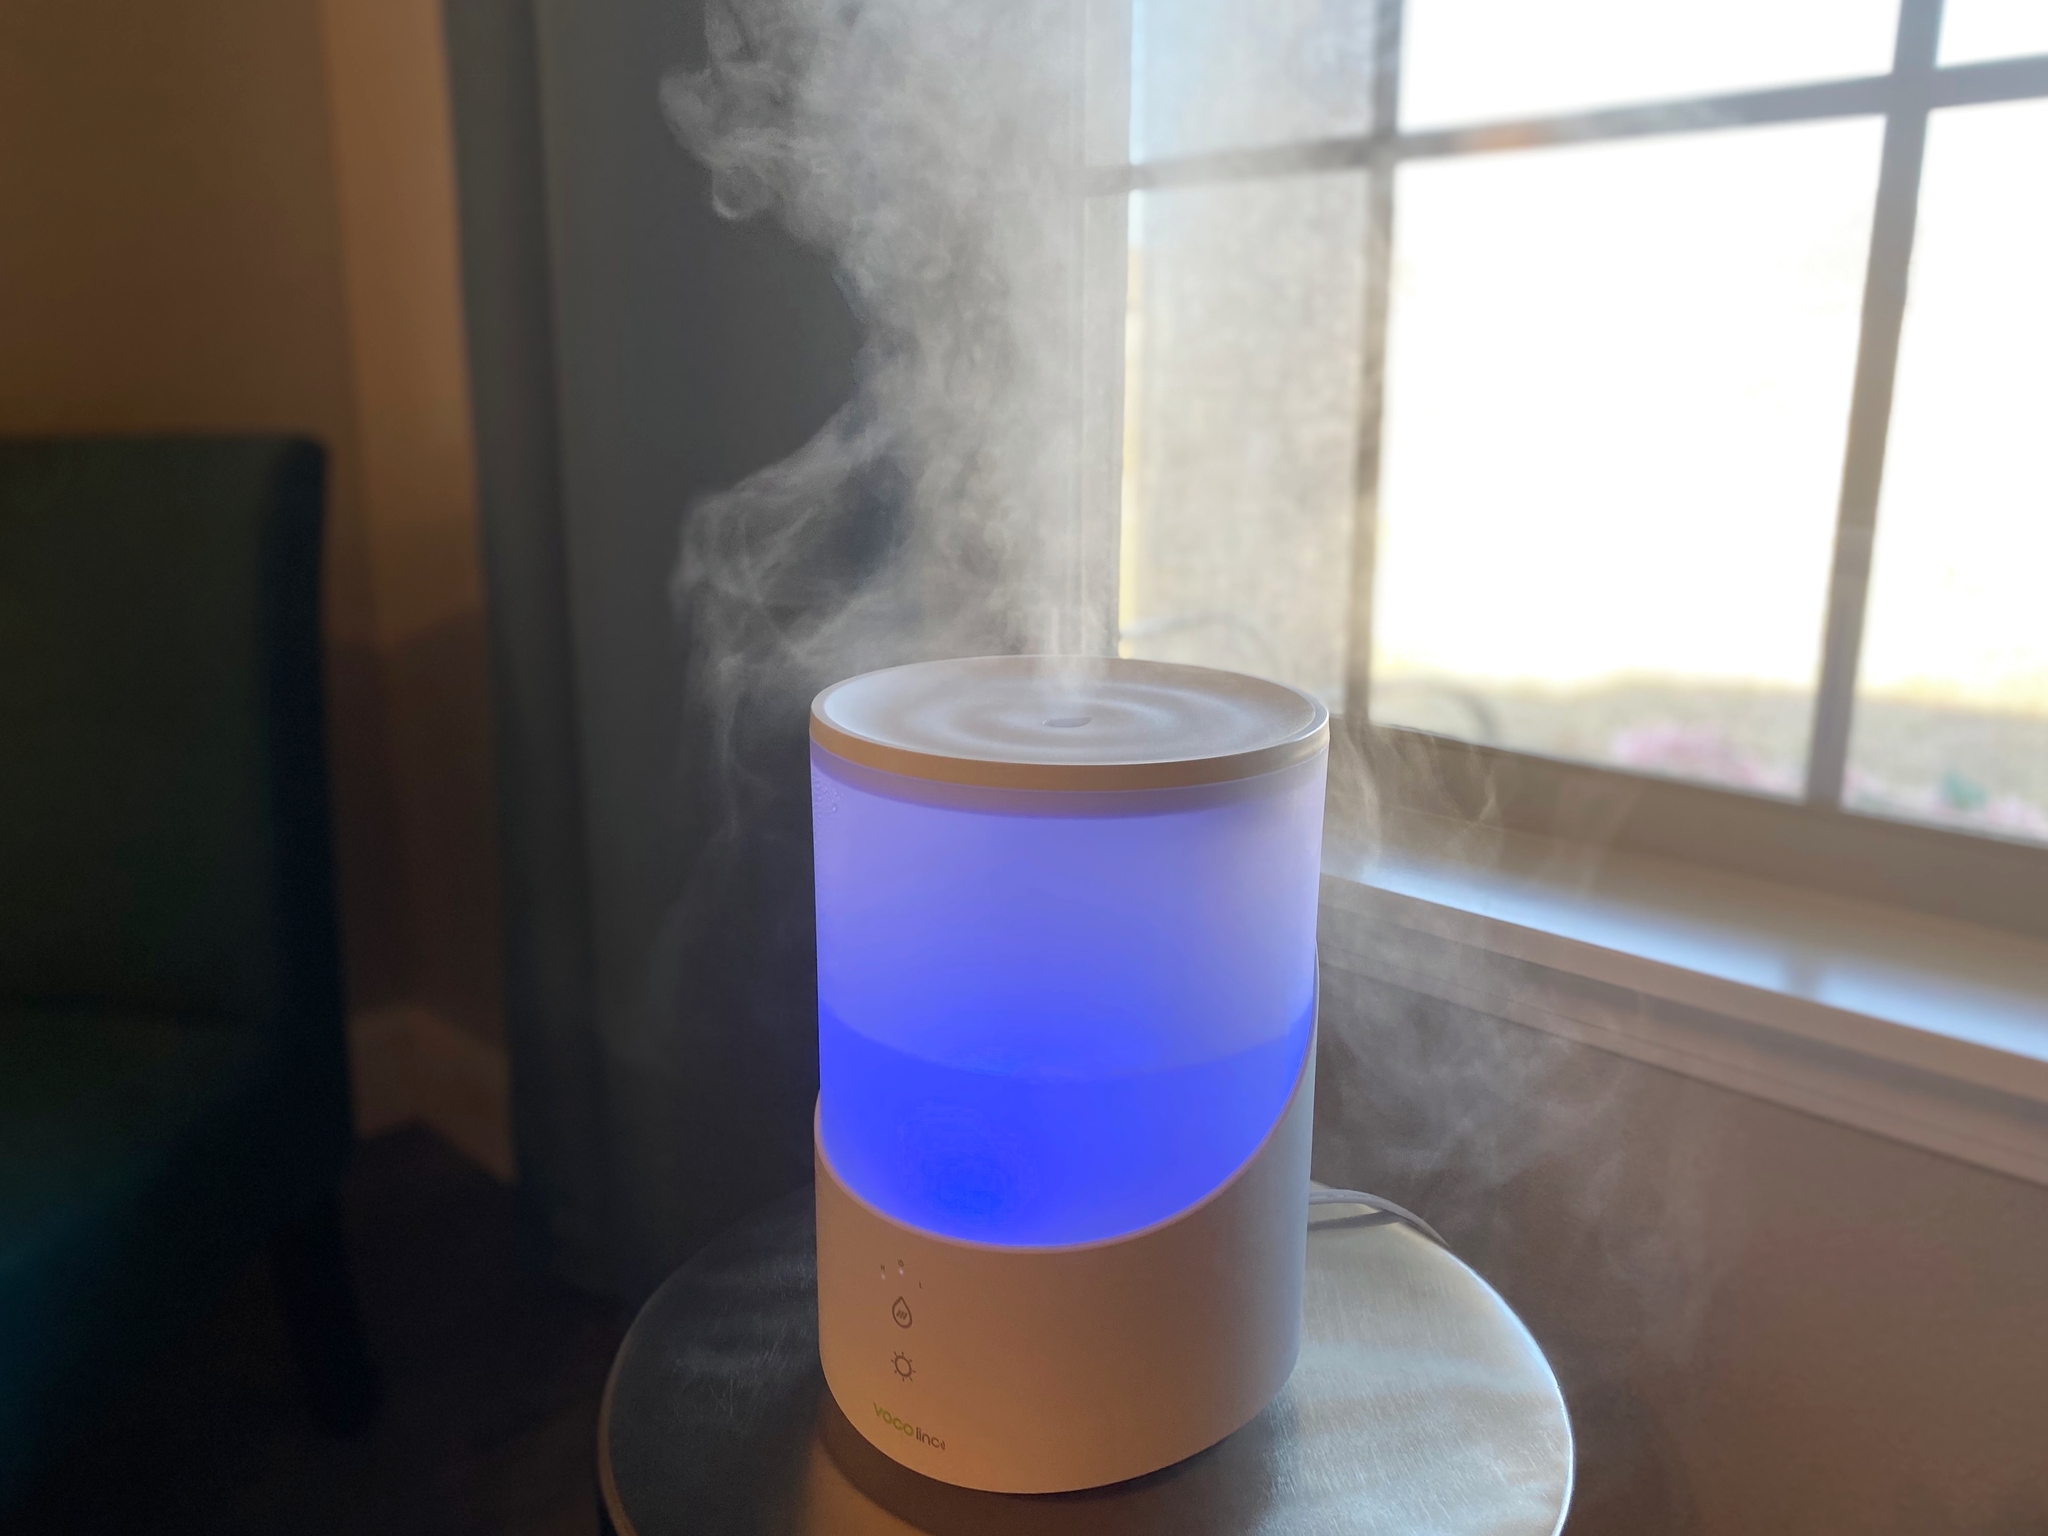 Vocolinc Mistflow Smart Humidifier Review on a table